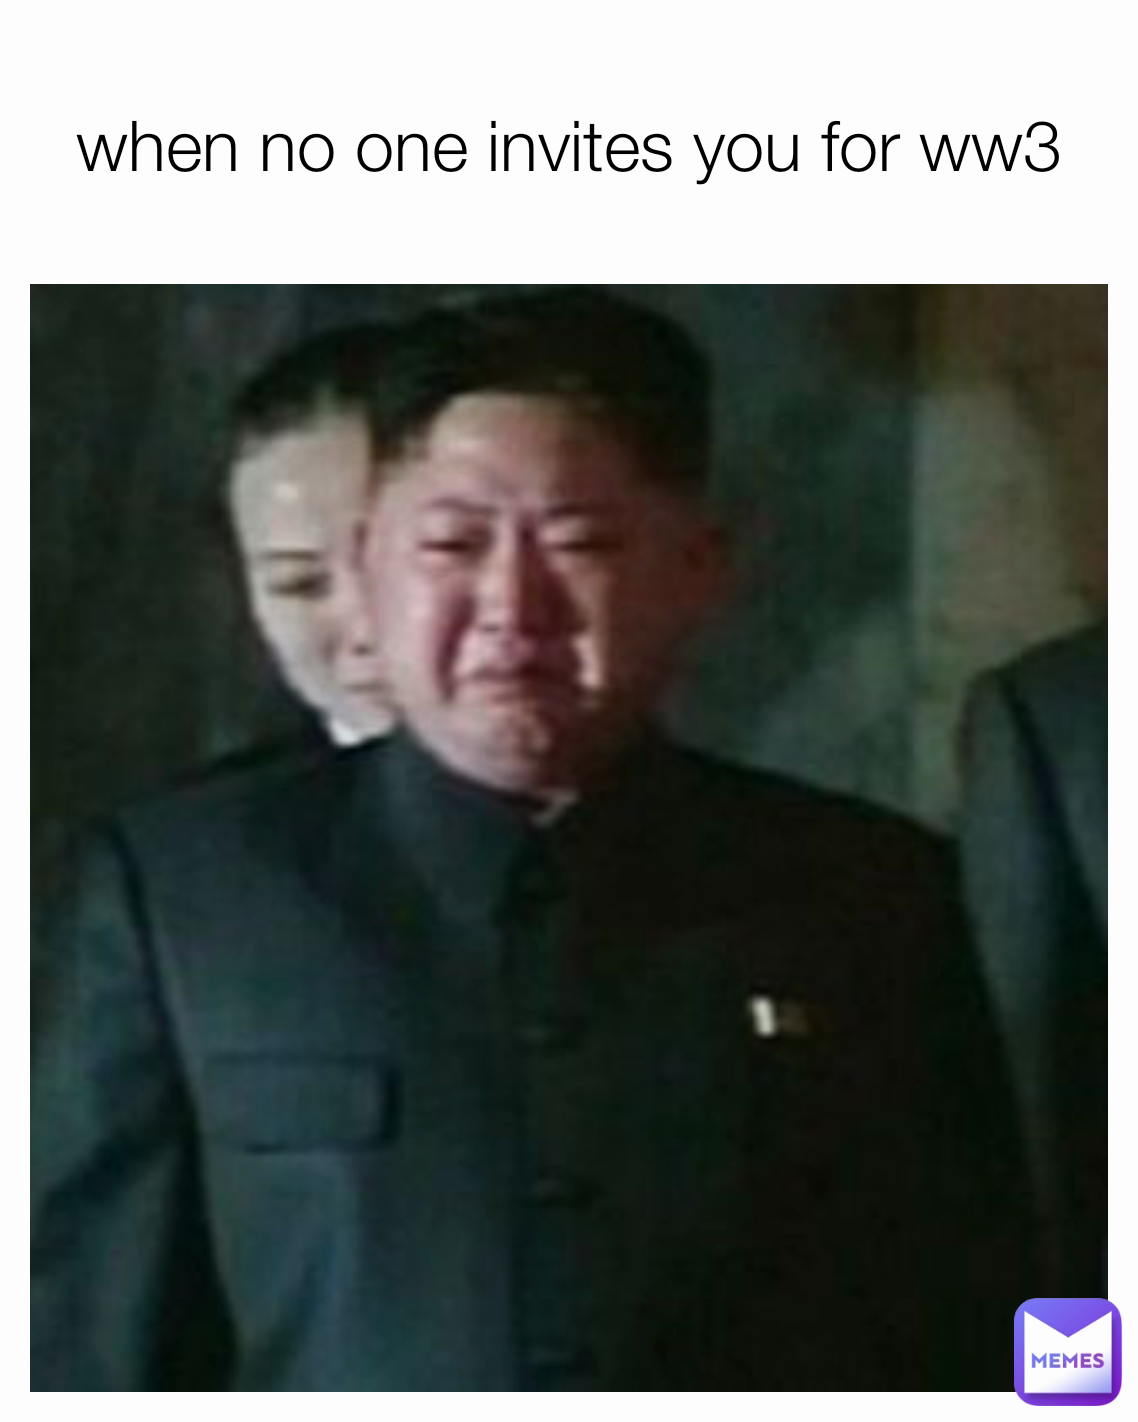 when no one invites you for ww3